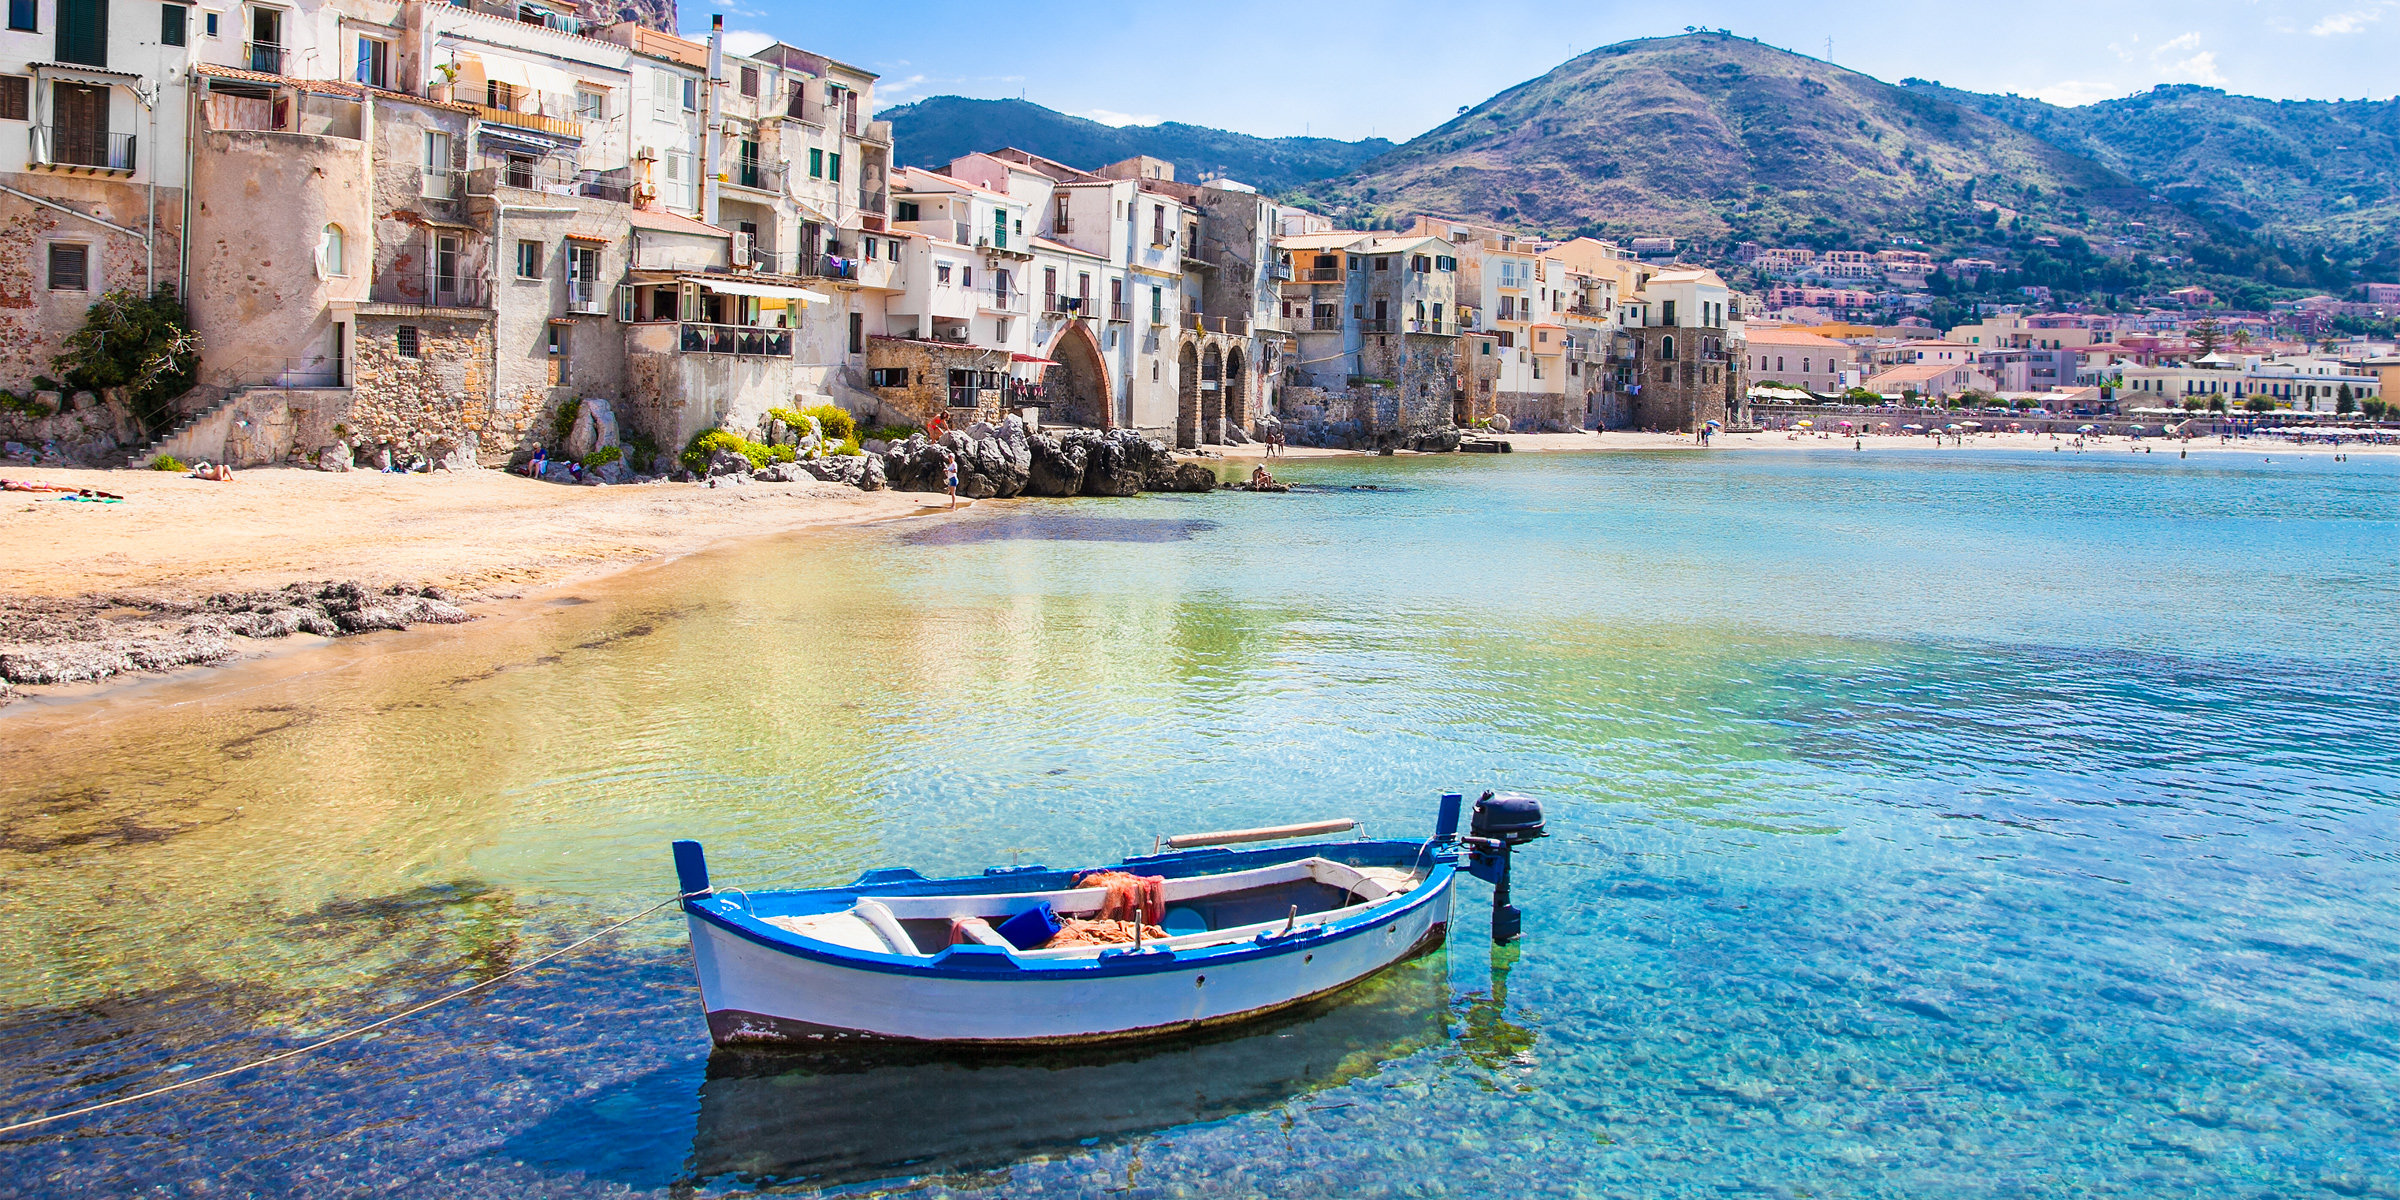 Cefalù, Sicilia - 15 of the Prettiest Towns and Villages in Italy